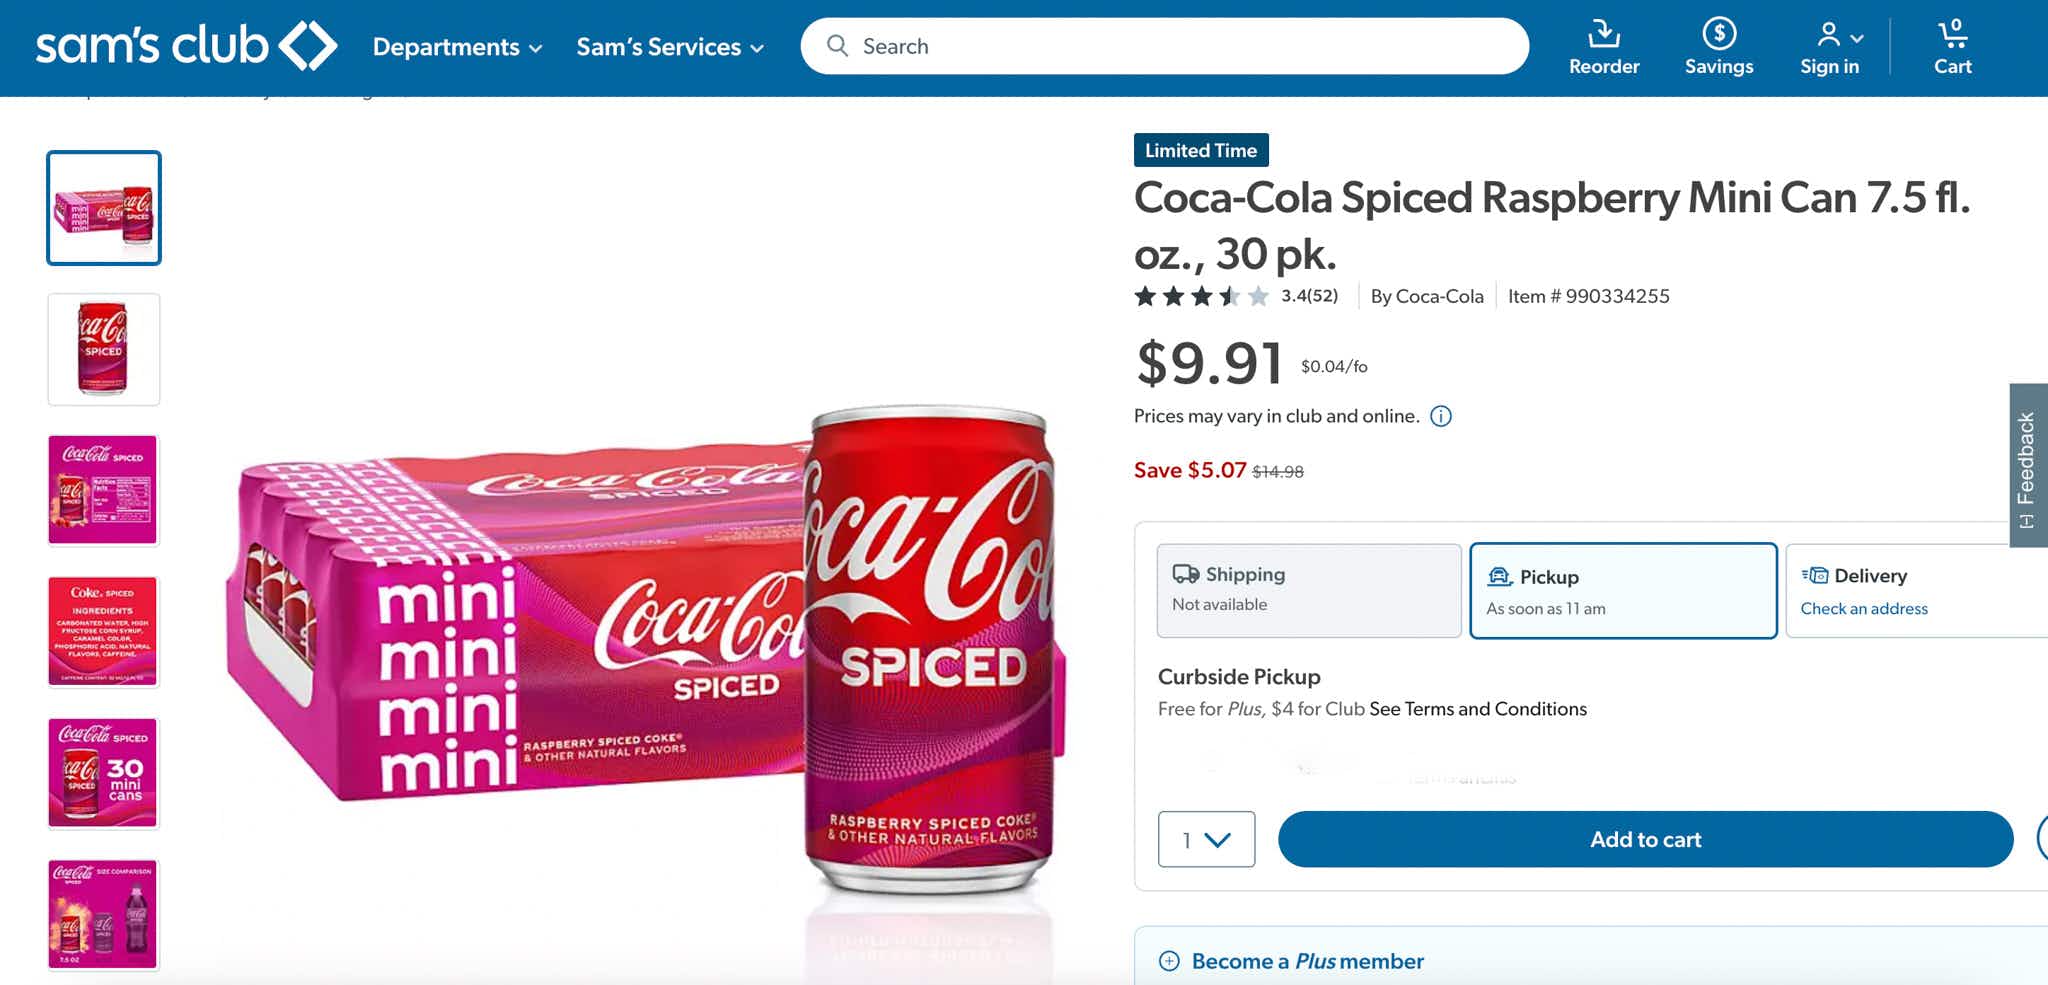 screenshot of coca-cola spiced mini cans for $9.91